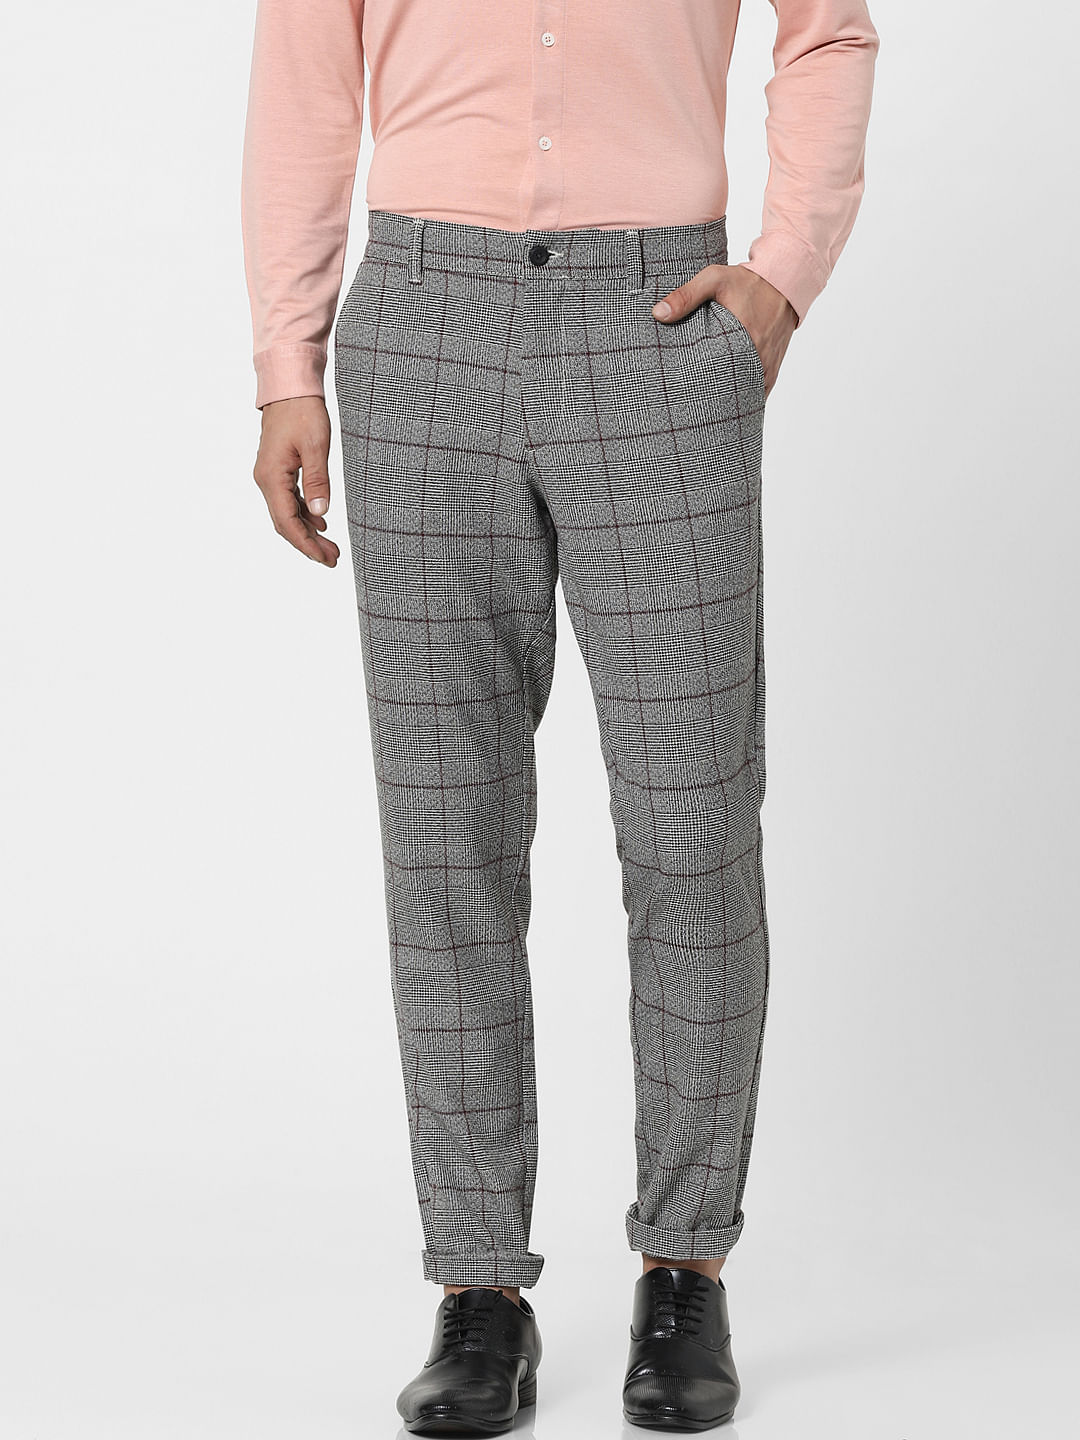 Men Checkered Black Track Pants Price in India, Full Specifications &  Offers | DTashion.com